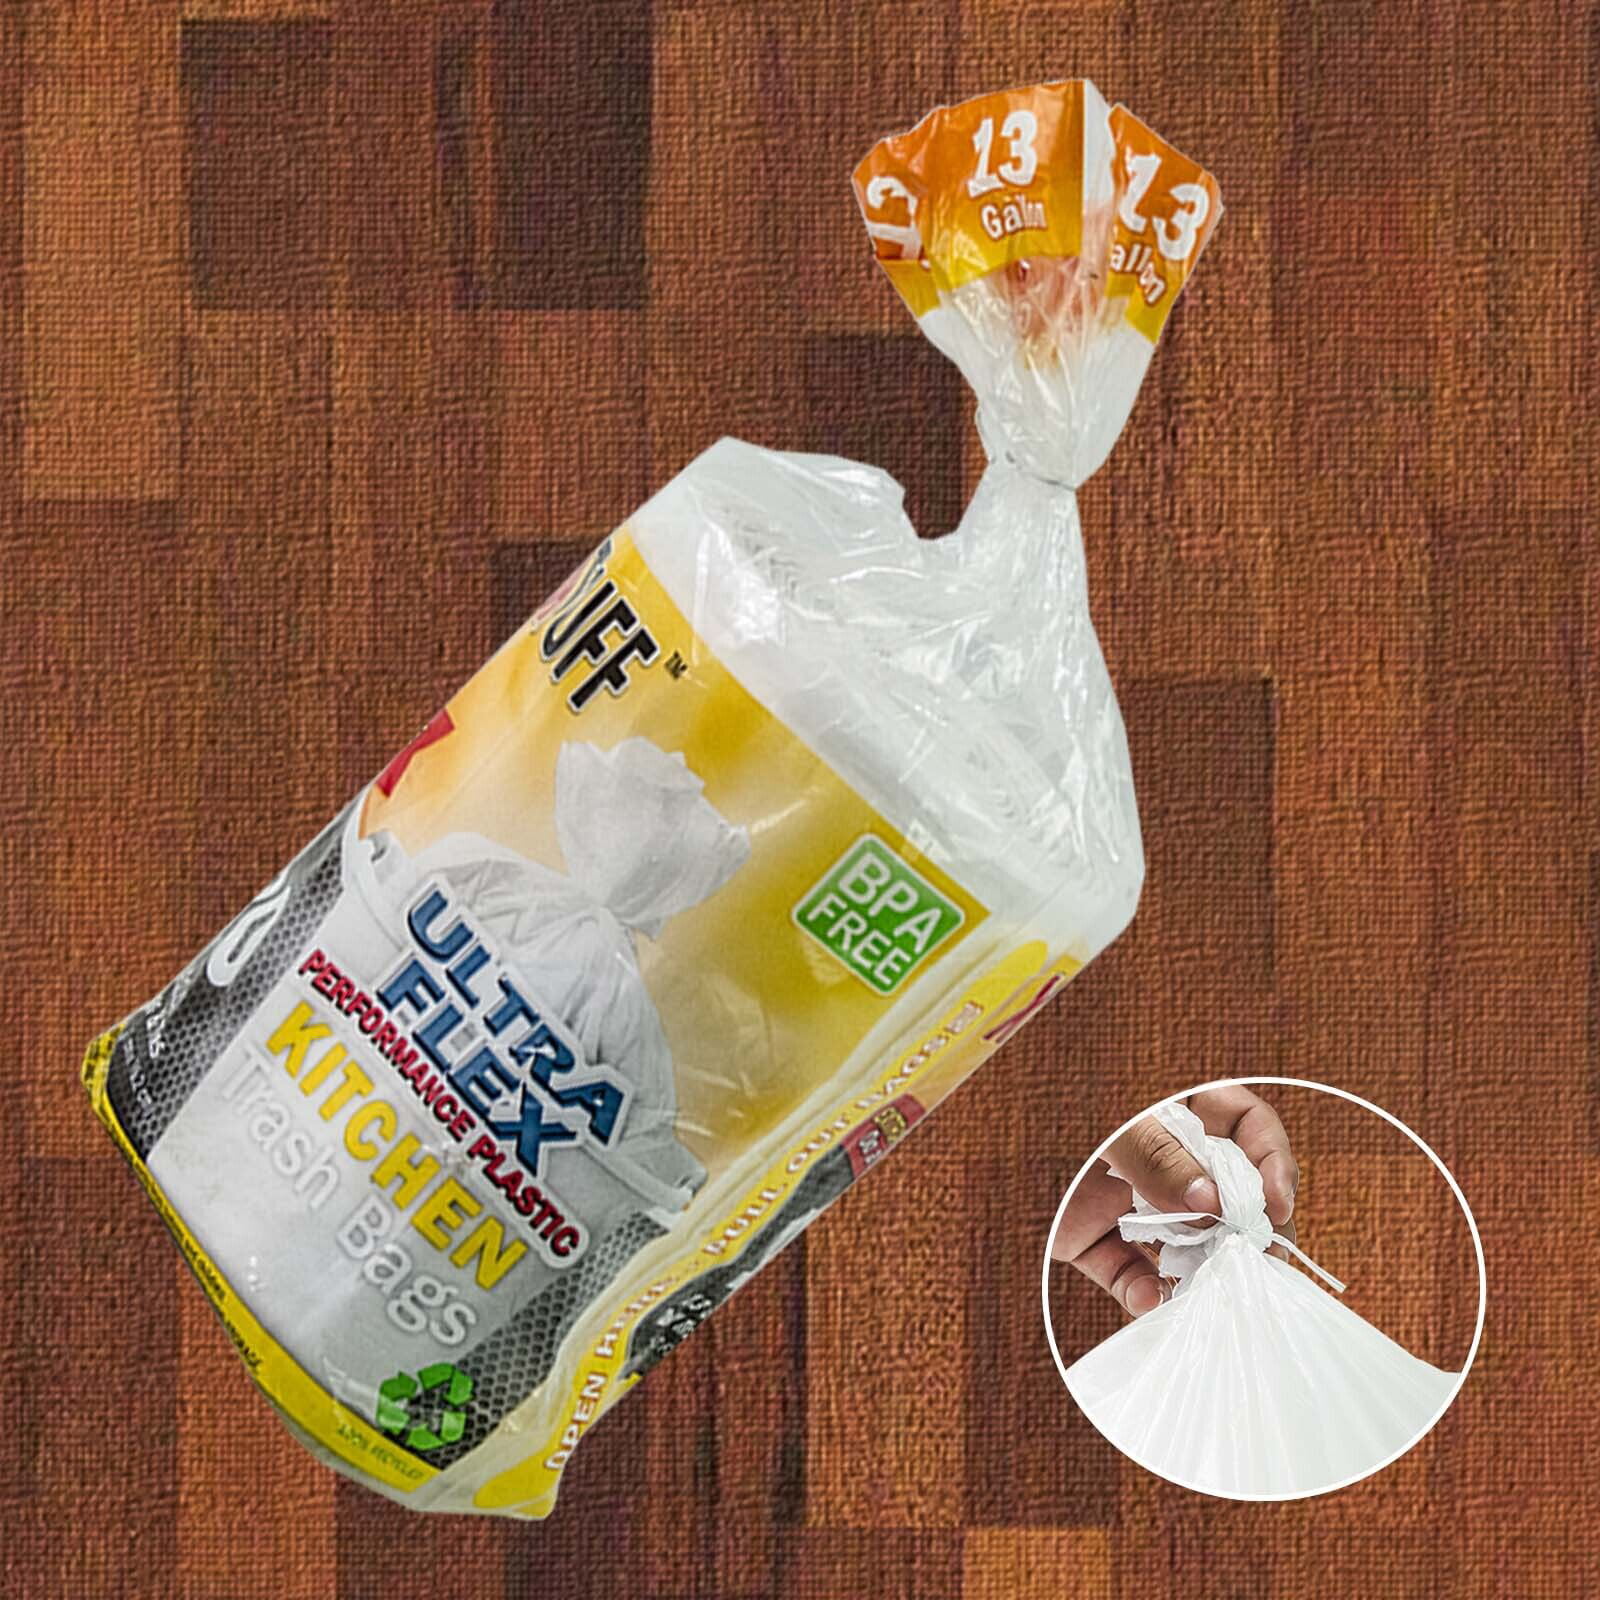 Check This Out™ 13 Gallon Tall White Kitchen Trash Bags, 15 ct - Kroger